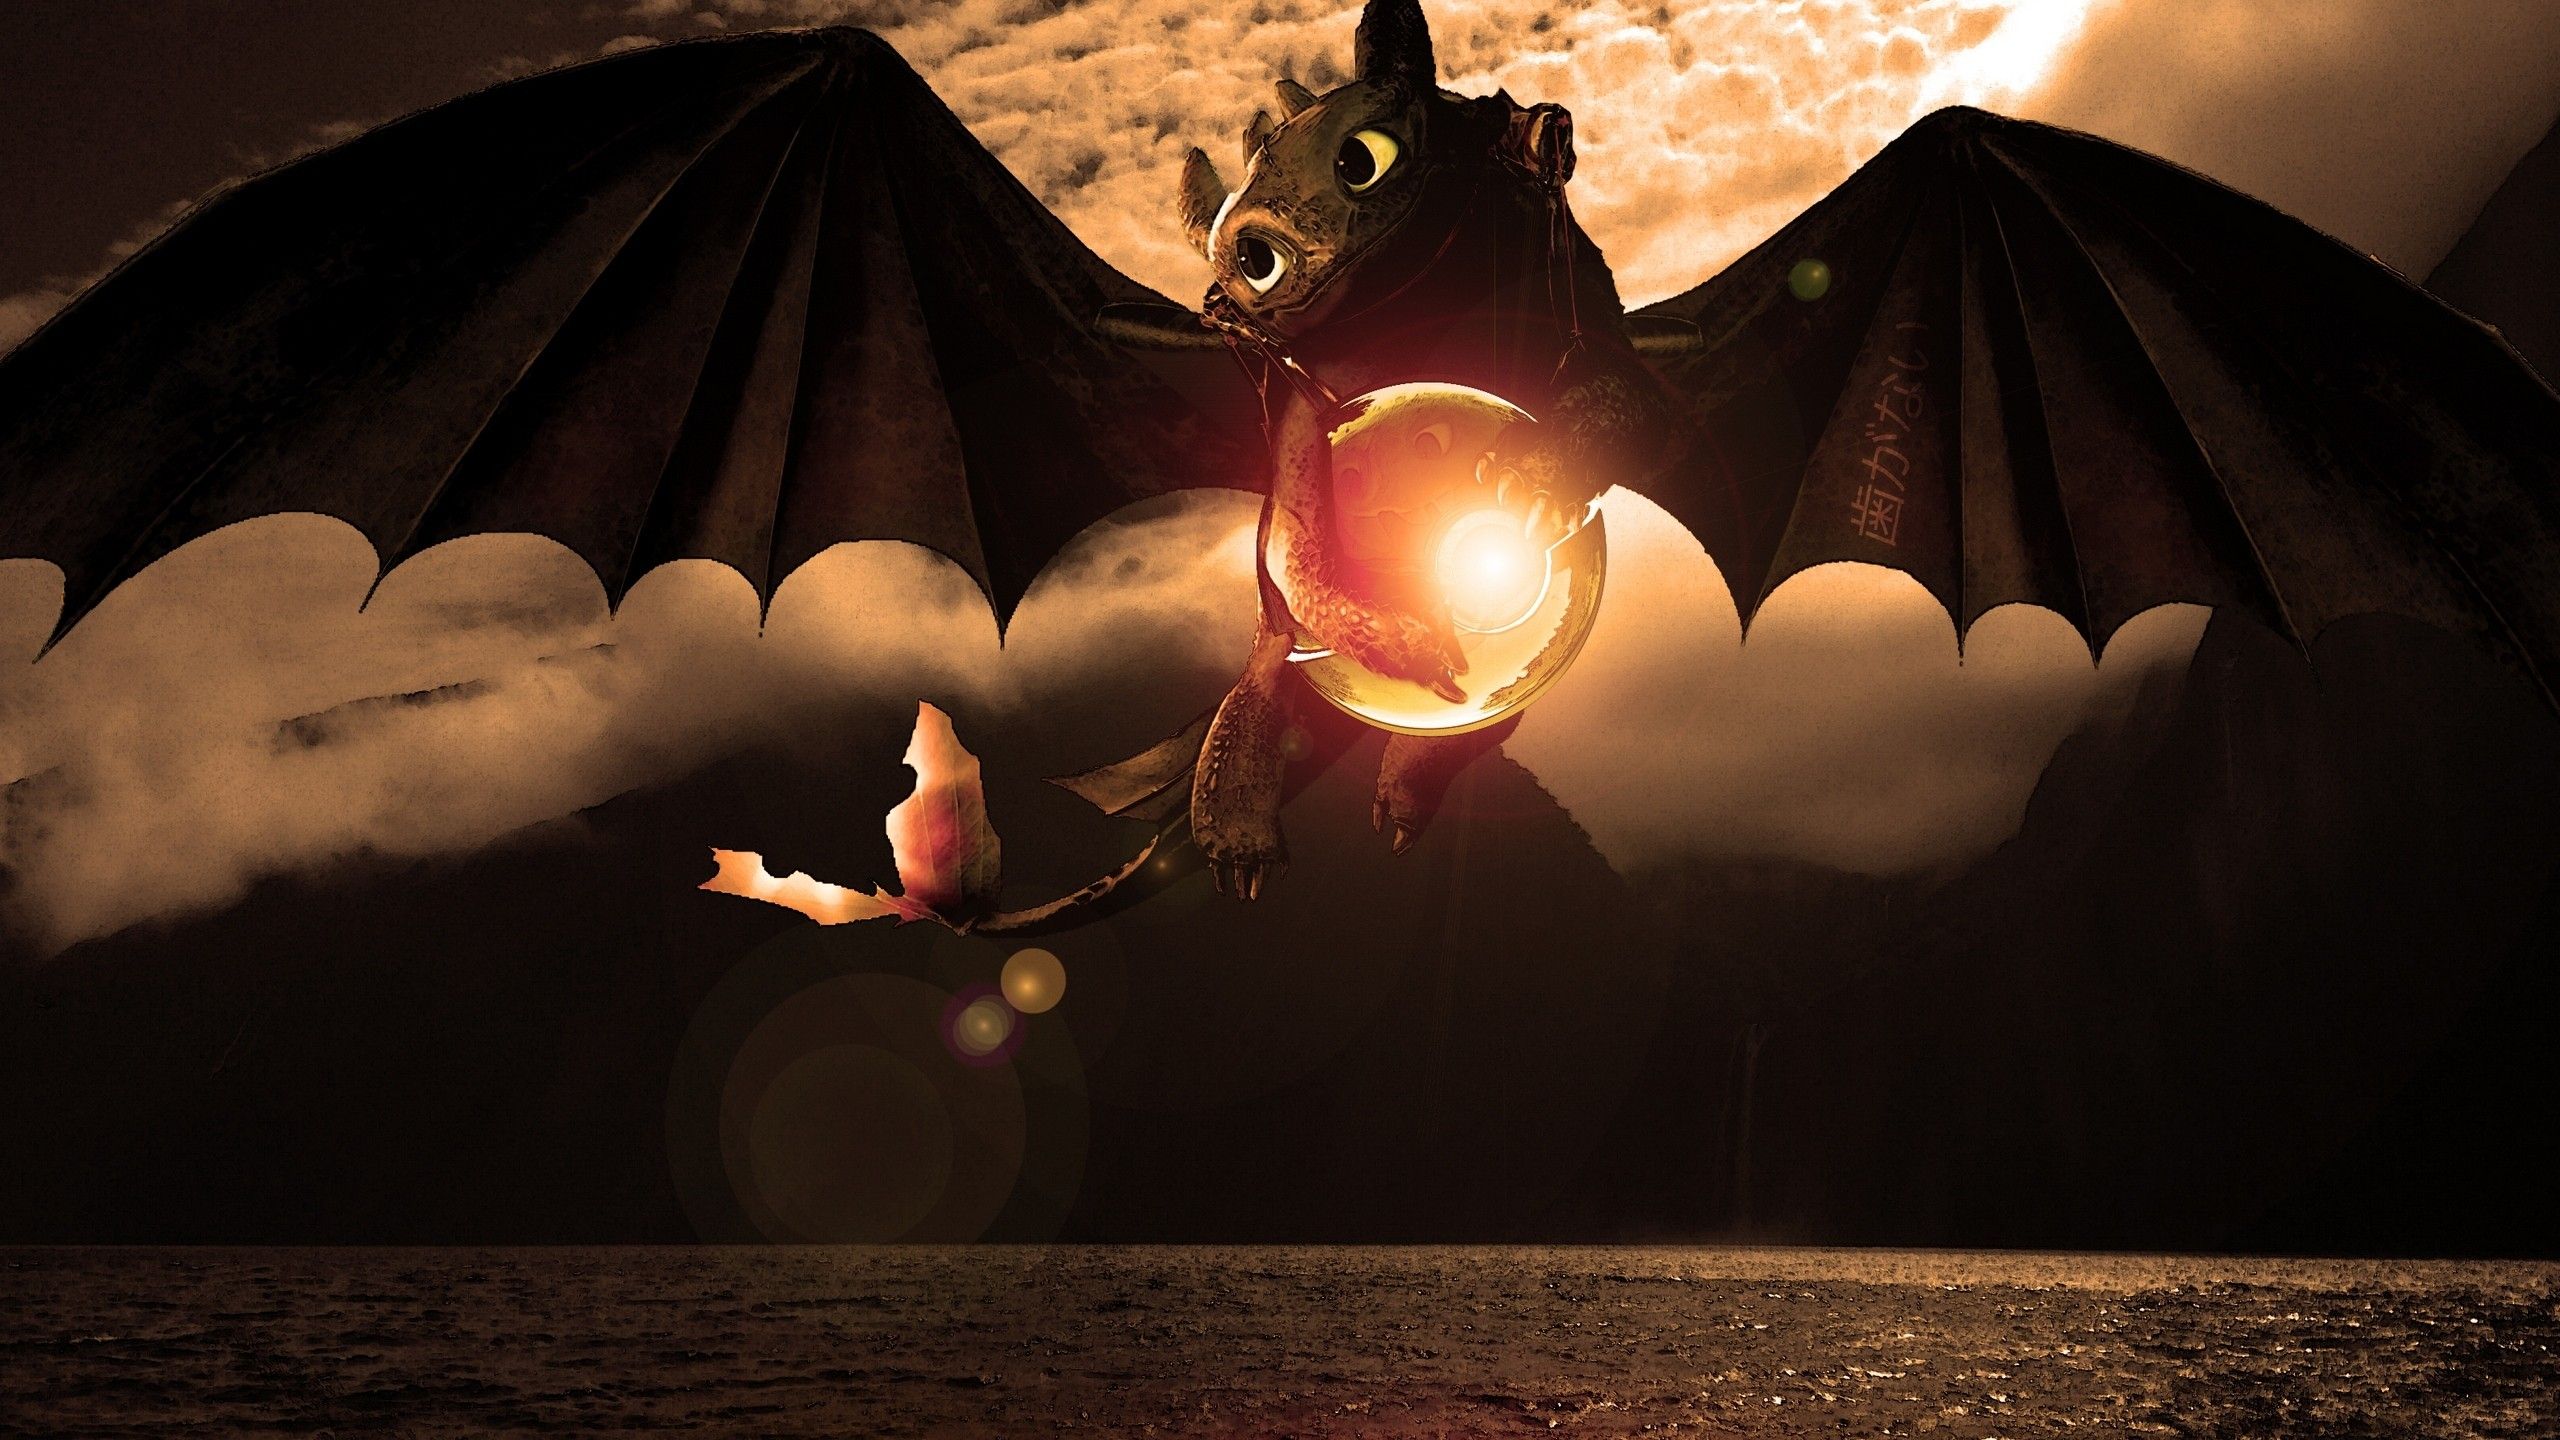 Download wallpaper the pokeball of toothless the dragon, wazzy88 ...